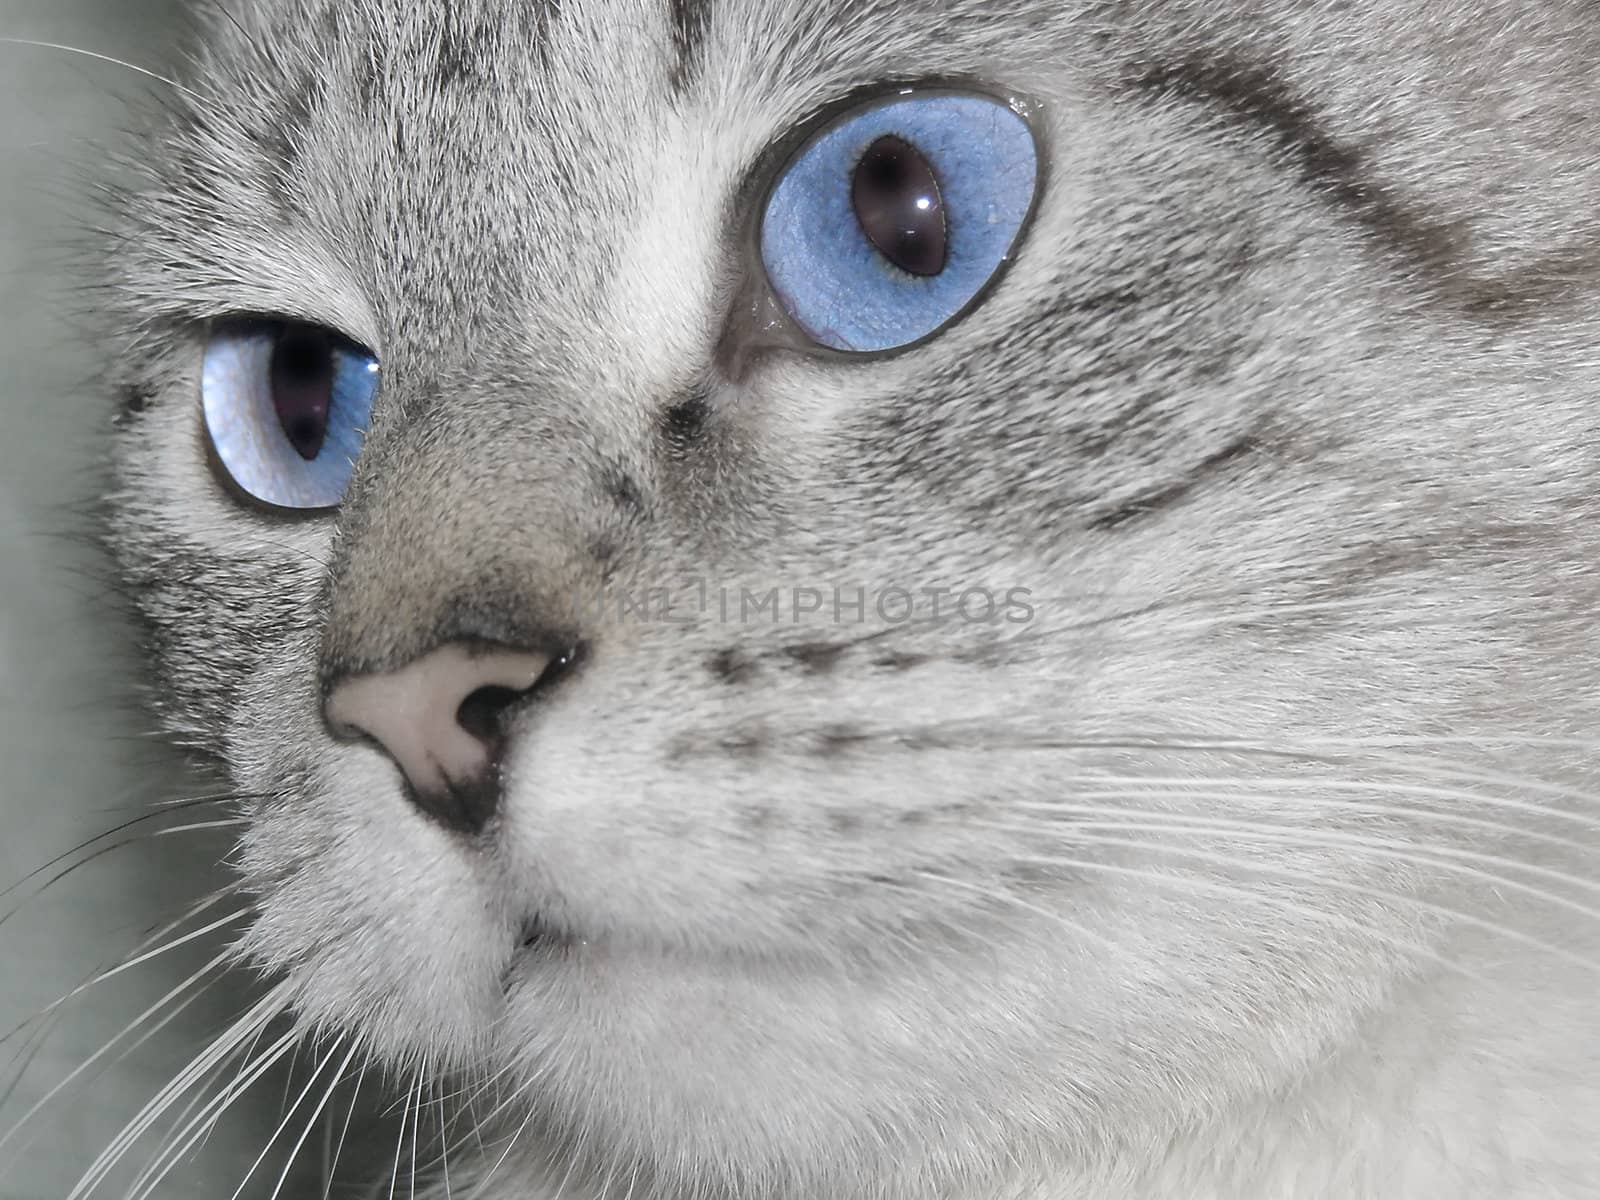 snout of  a cat  with blue eyes